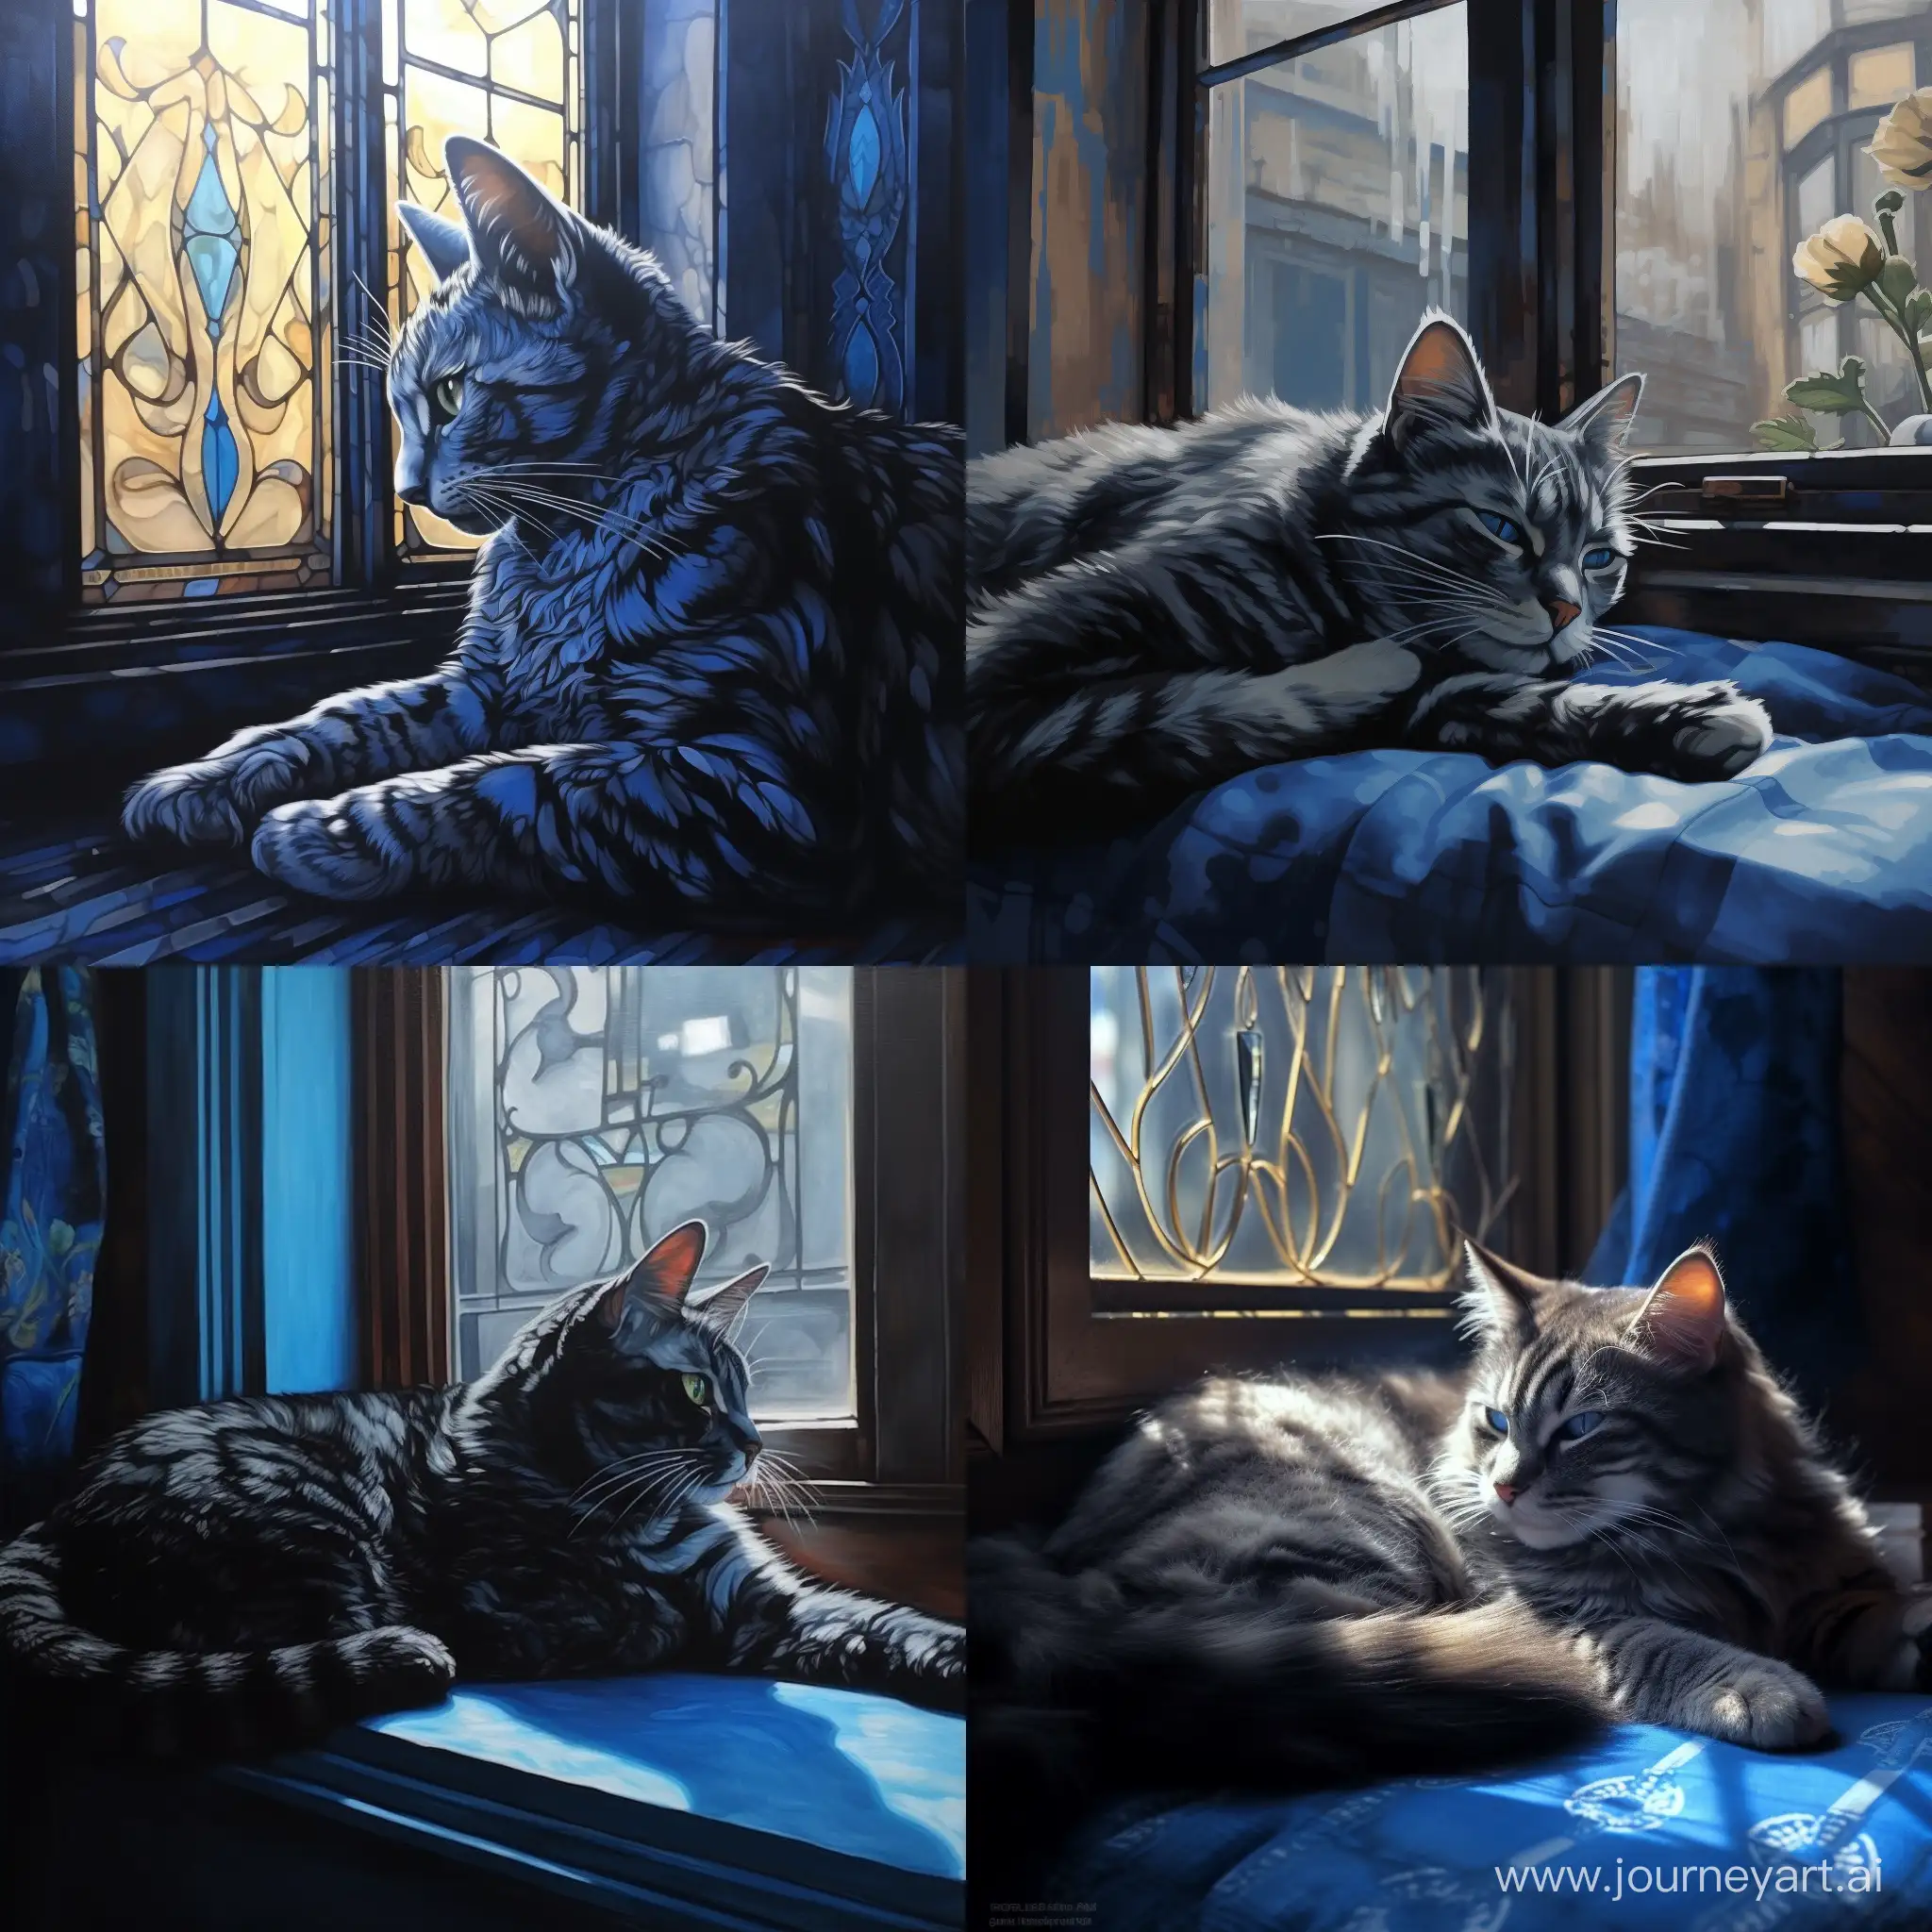 Serene-Blue-Cat-with-Black-Patterns-Lounging-by-Sunlit-Window